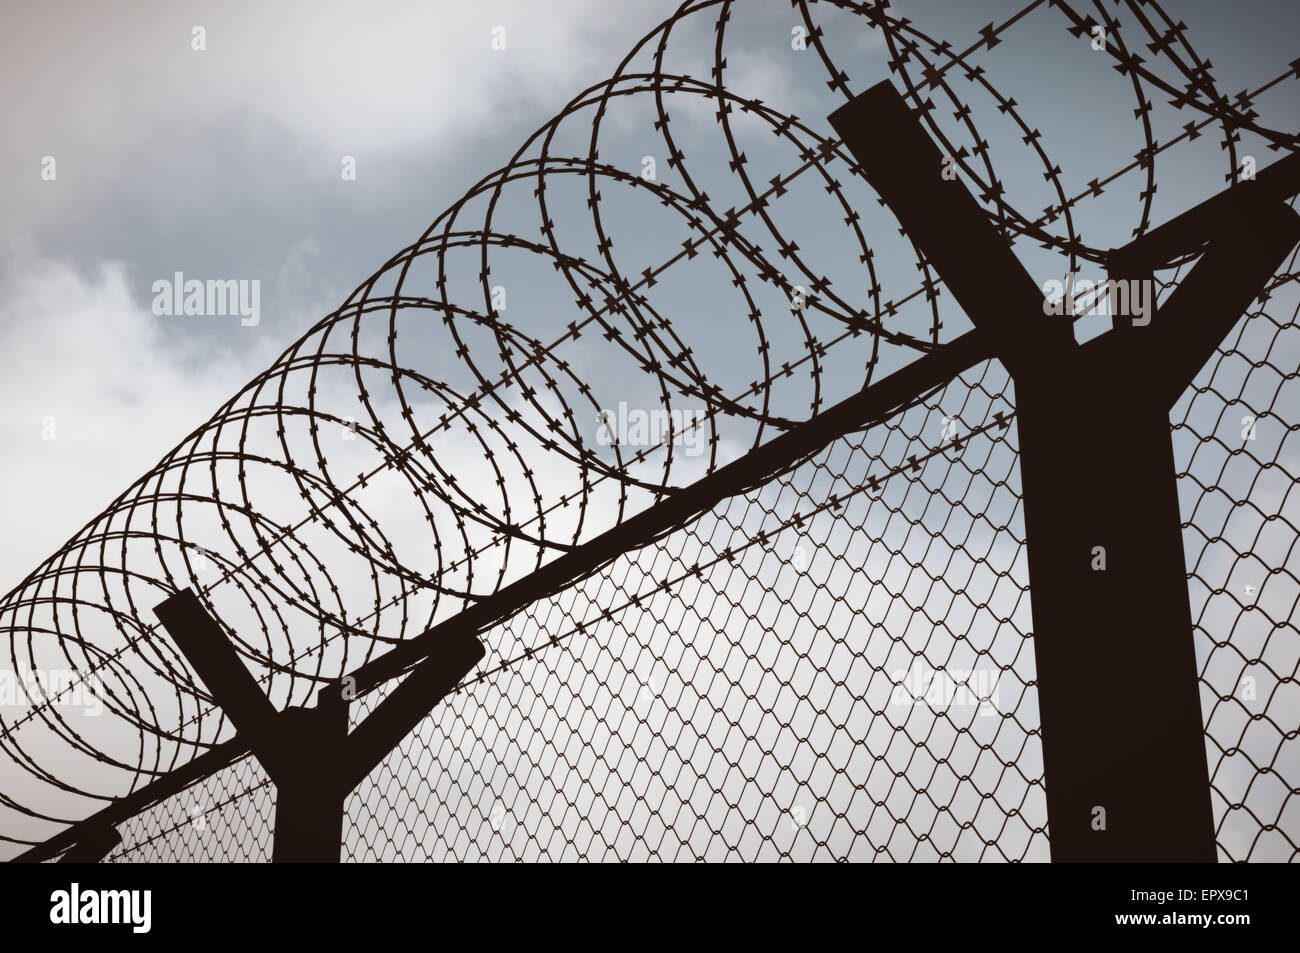 Fence with a barbed wire, silhouette illustration Stock Photo